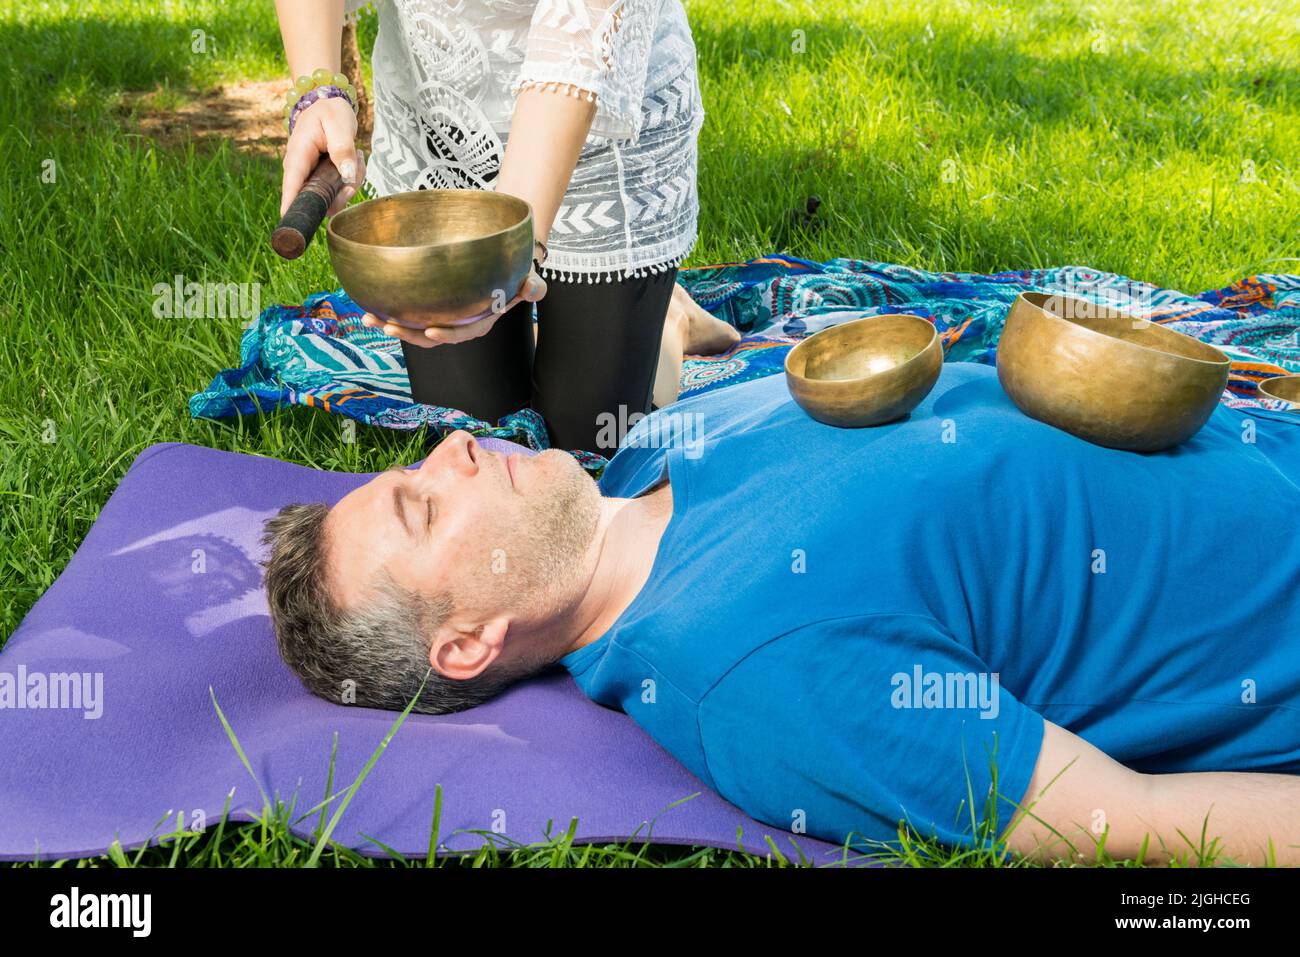 A man lying on a yoga mat with singing bowls on his body while a woman performs a music therapy session with singing bowls on a grassy area. Stock Photo